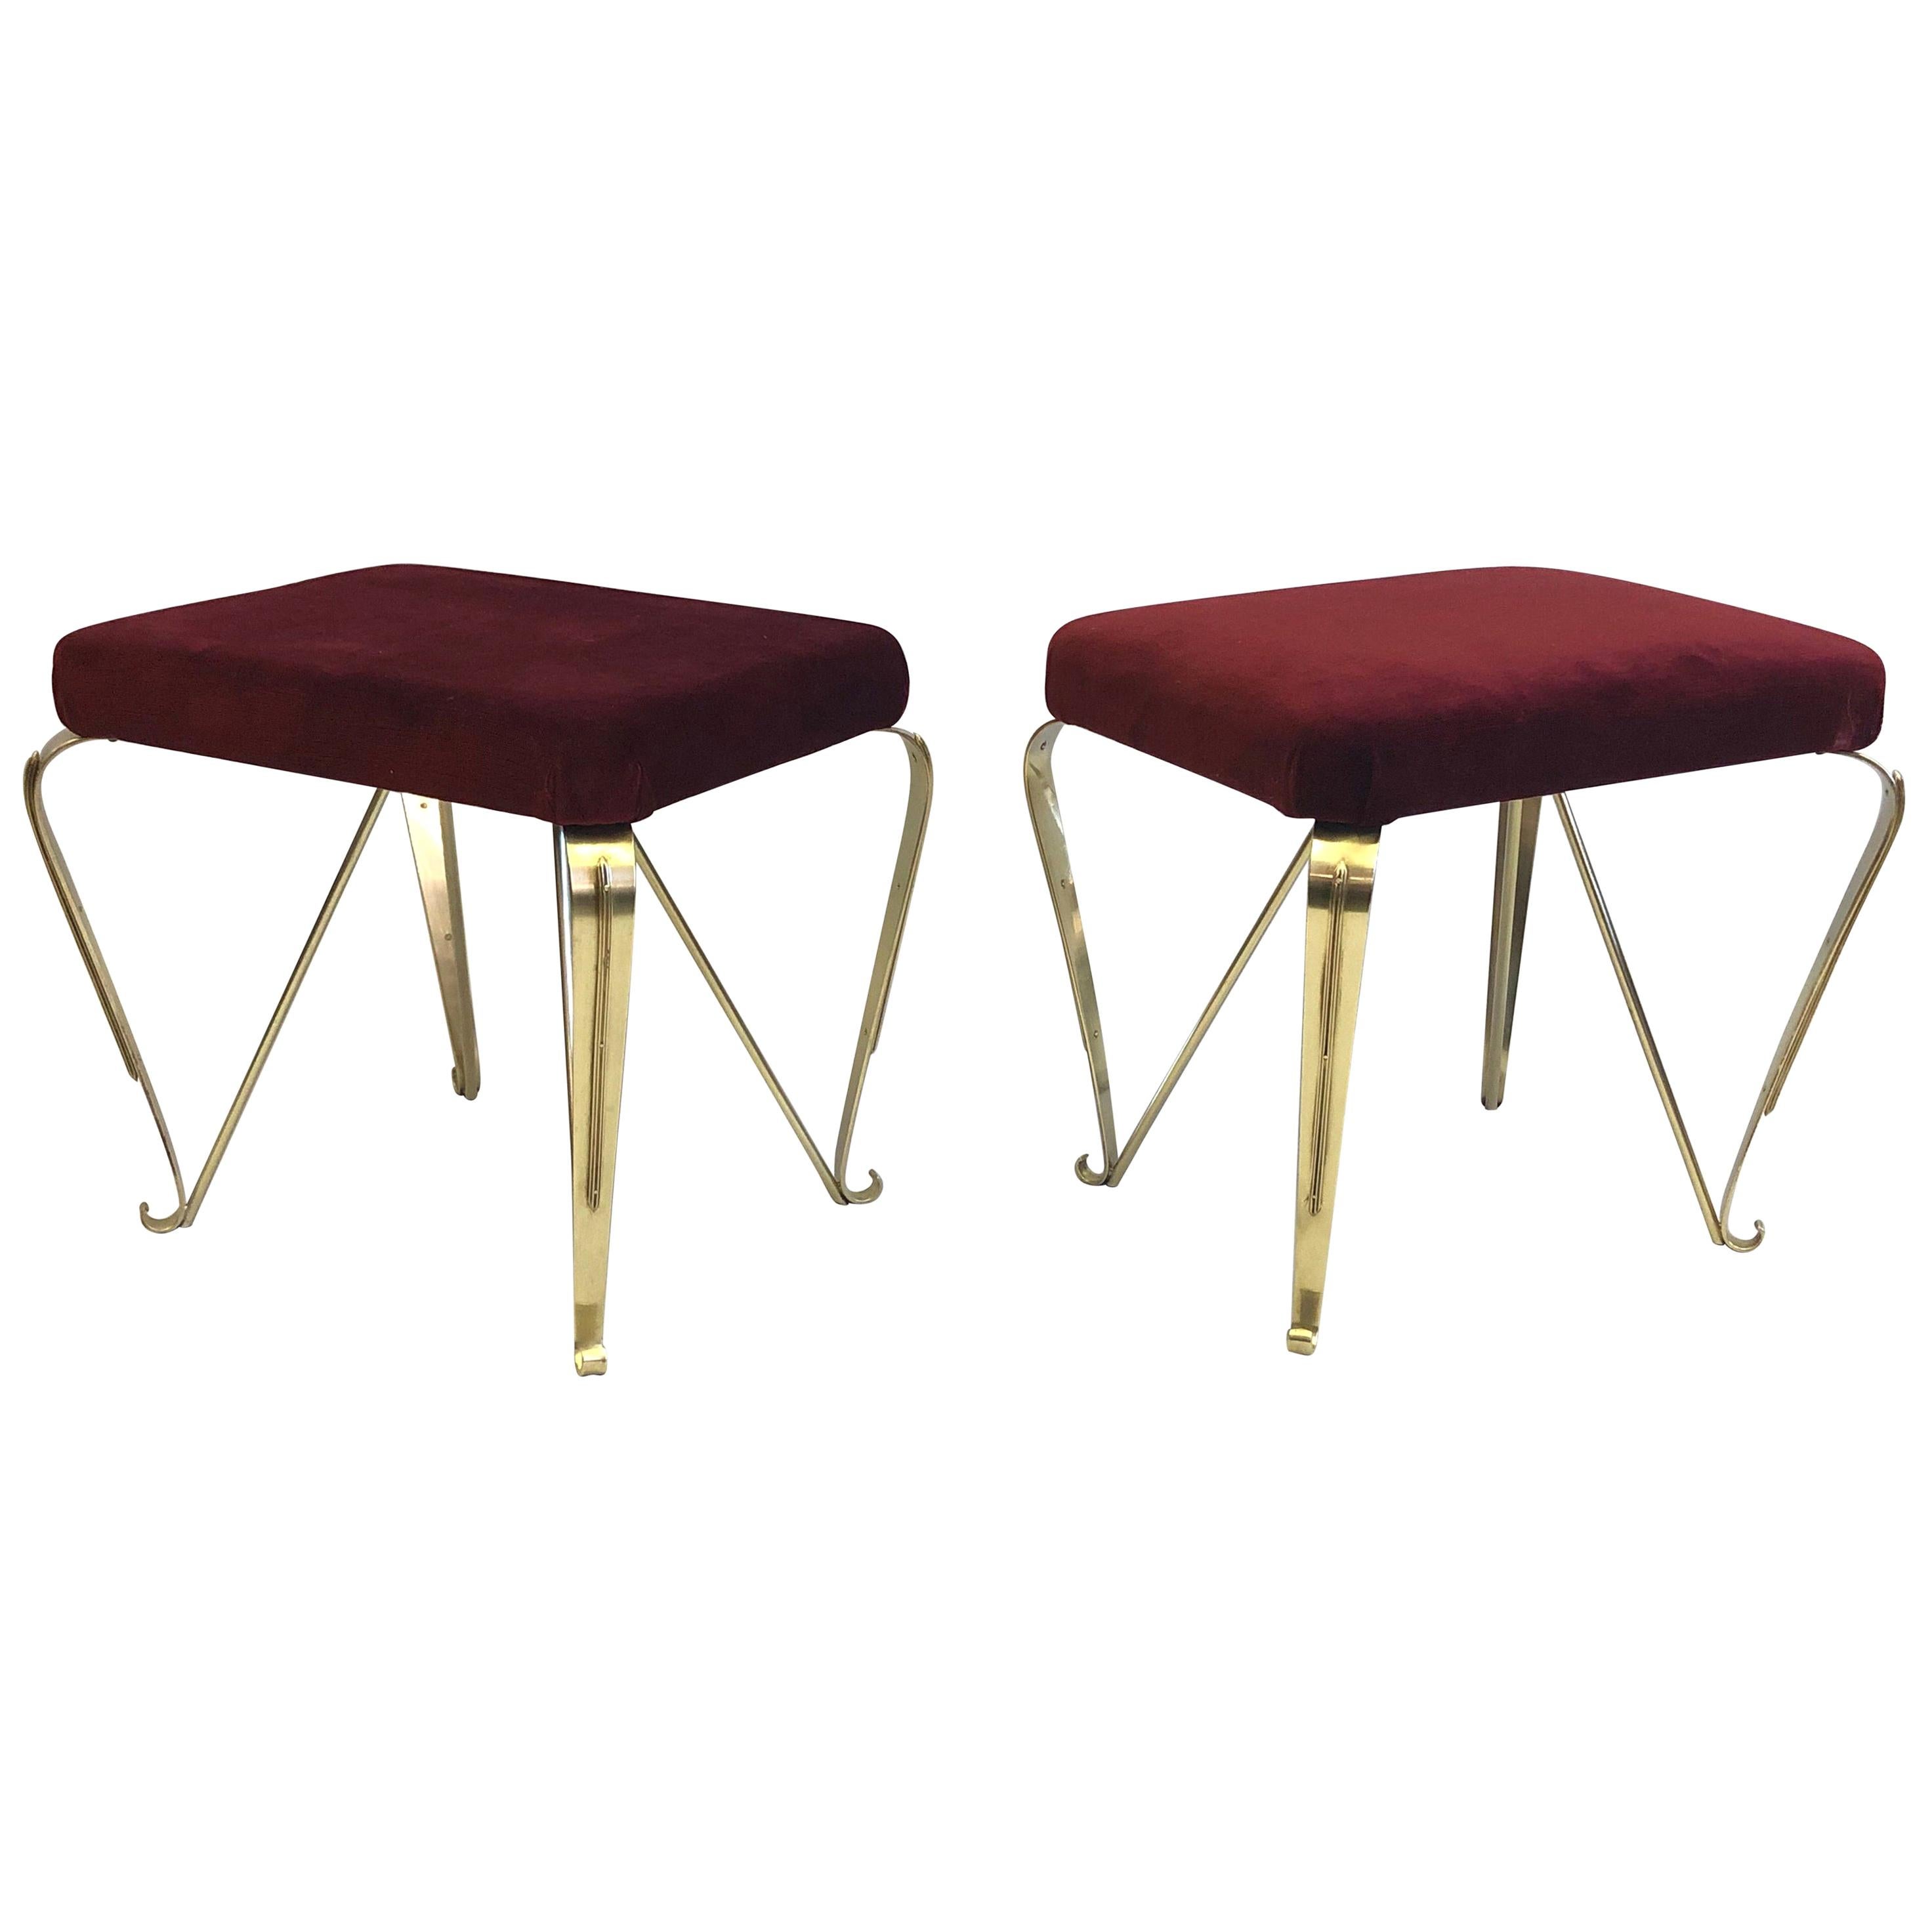 Pair of Italian Mid-Century Modern Neoclassical Solid Brass Benches by Jansen For Sale